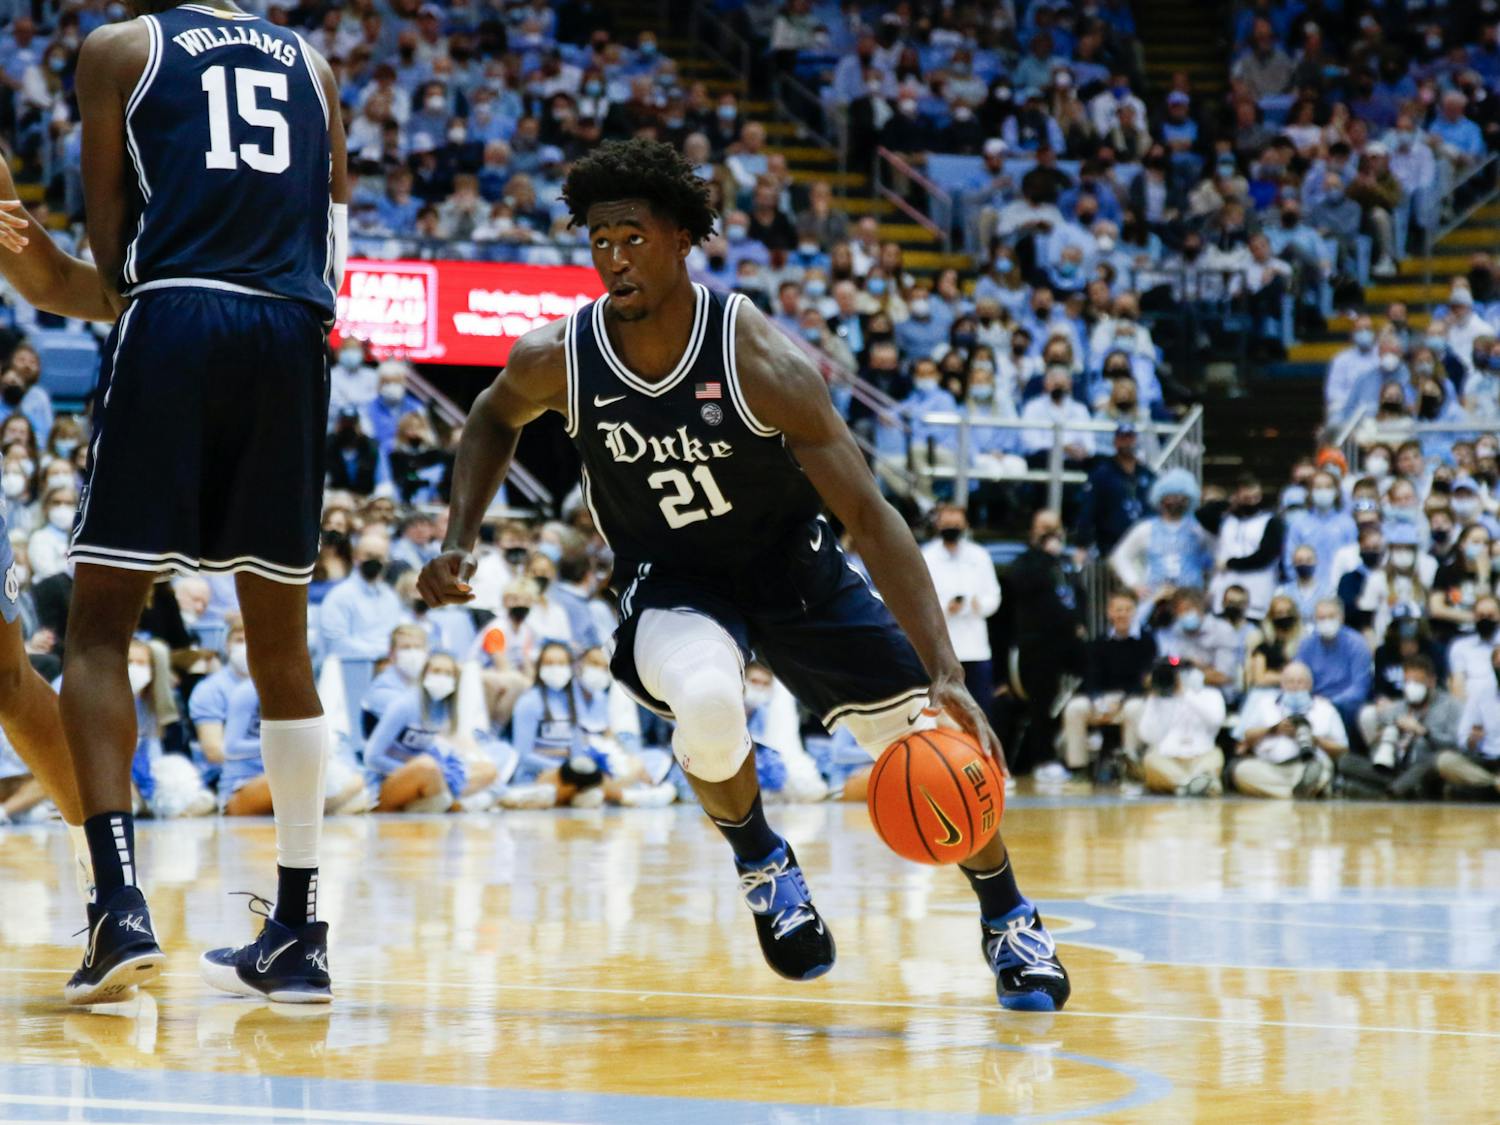 Duke Men's Basketball beats UNC at UNC 87-67, led by AJ Griffin and Paolo Banchero